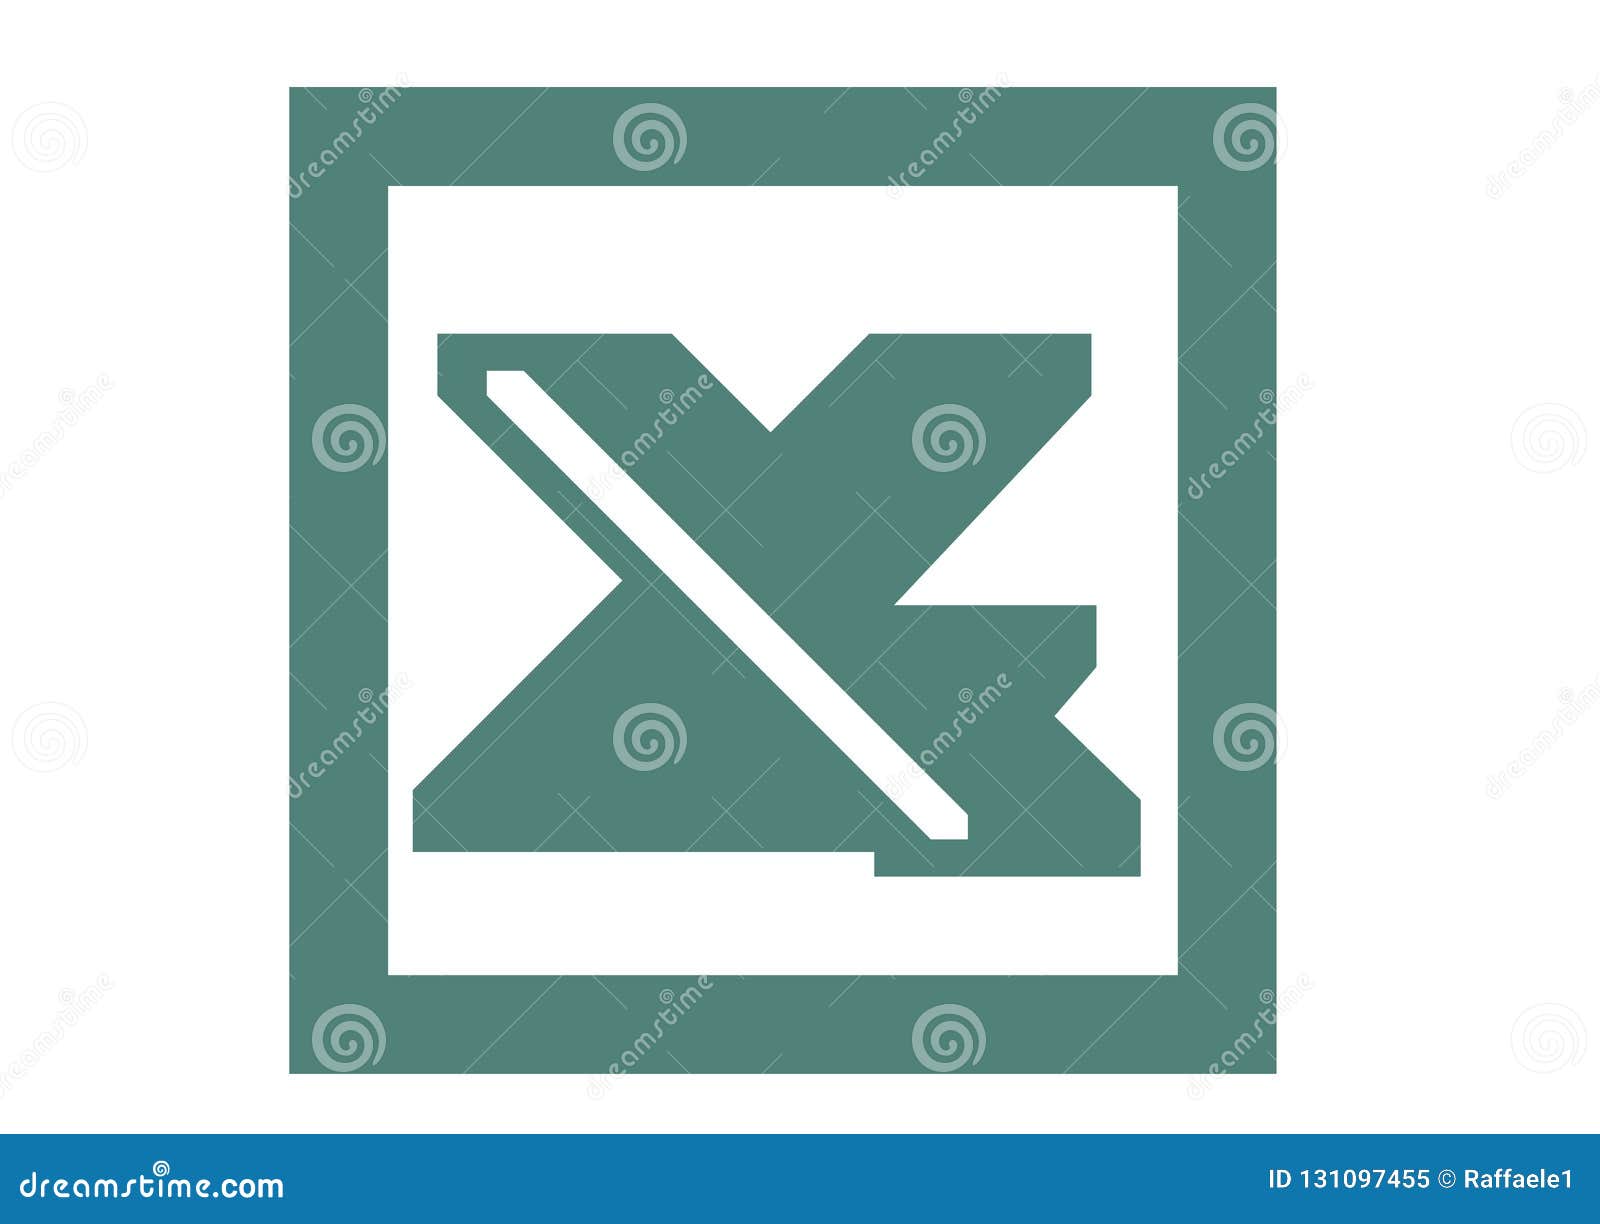 Microsoft Excel Old Logo Editorial Image Illustration Of Vector